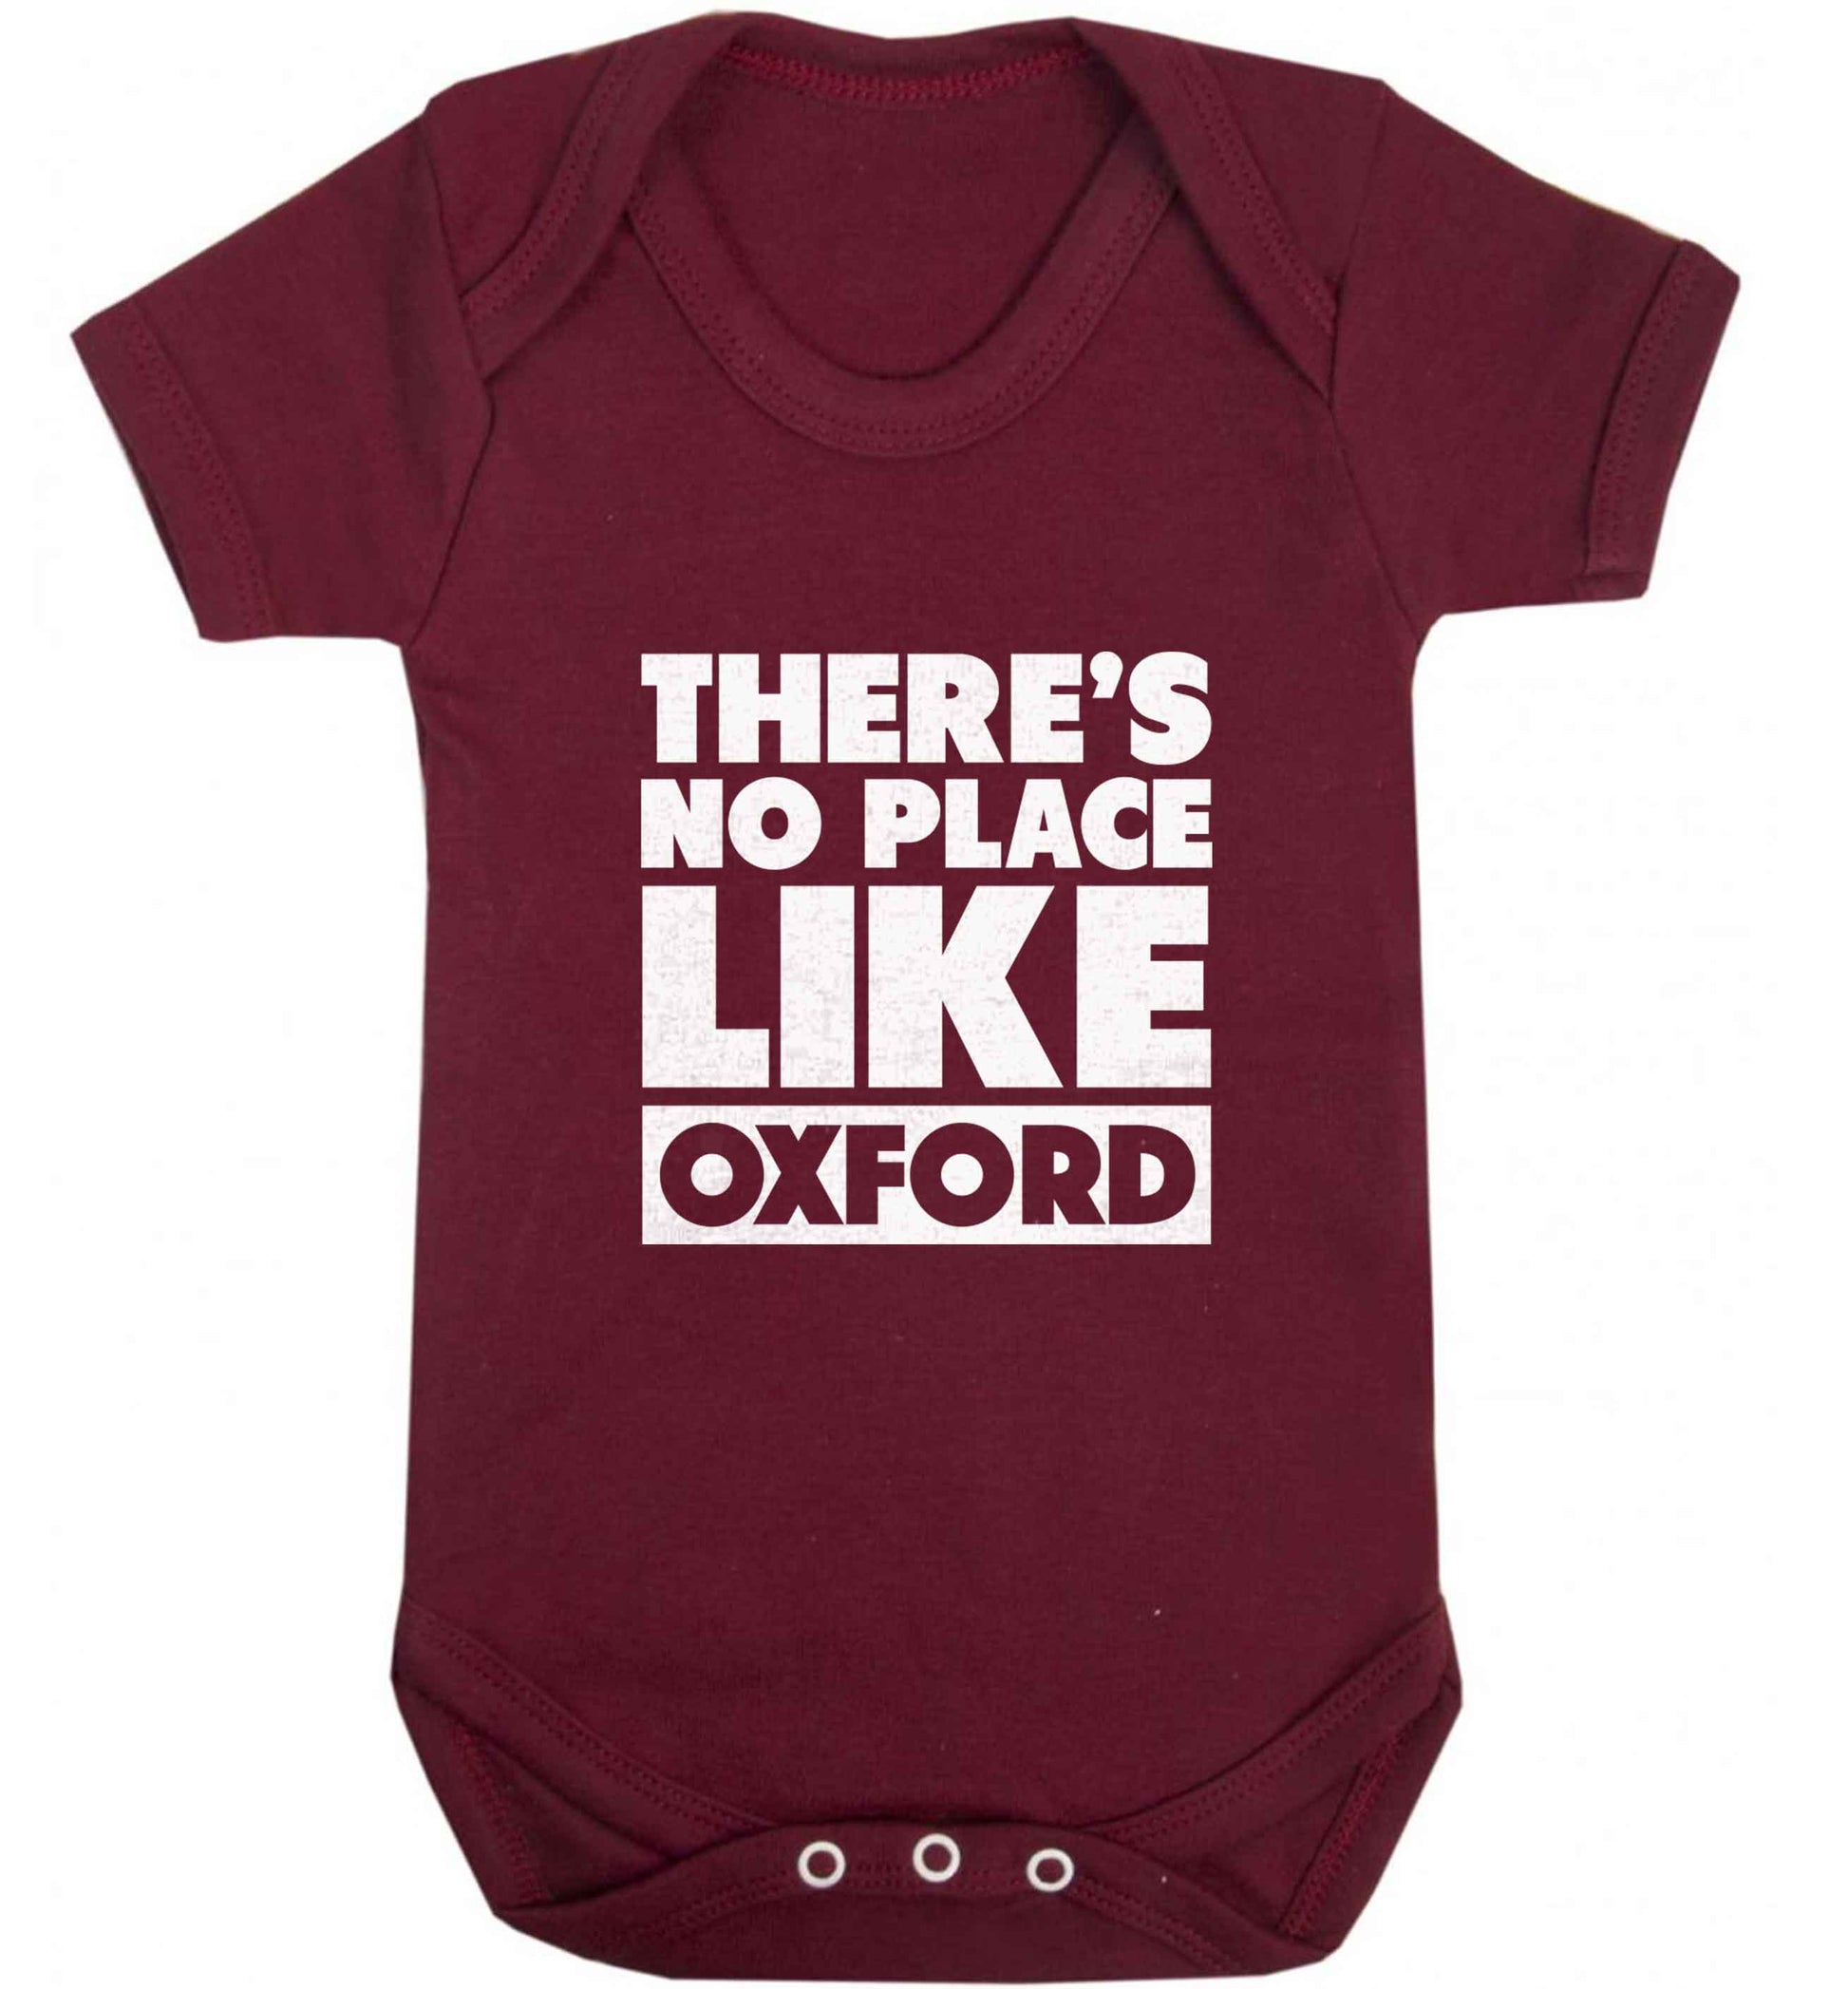 There's no place like Oxford baby vest maroon 18-24 months